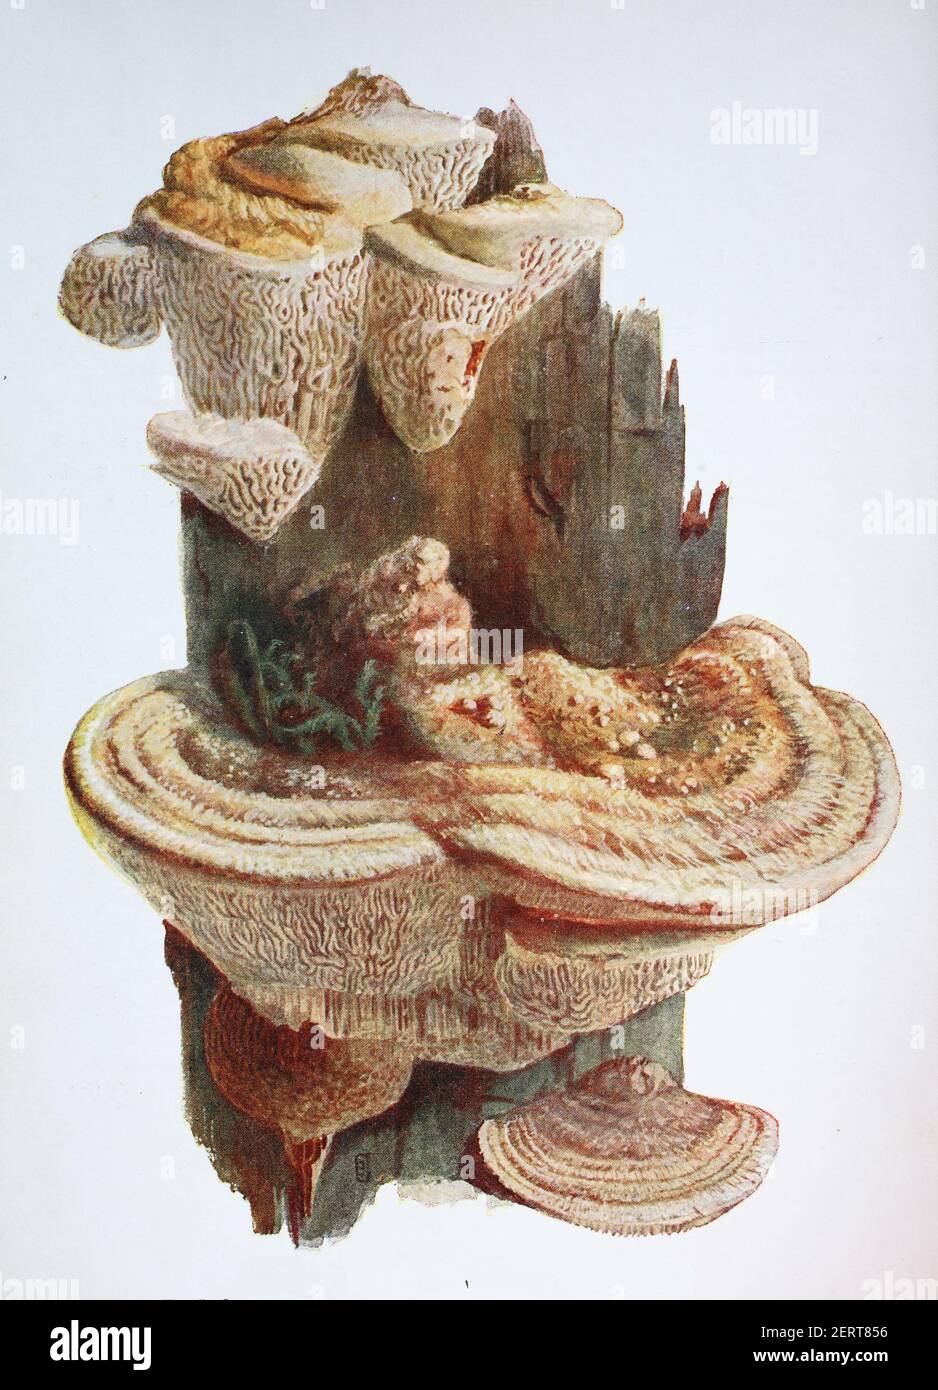 Daedalea quercina is a species of mushroom in the Polyporales order. It is the type species of the genus Daedalea. Commonly known as the oak mazegill or maze-gill fungus, digital reproduction of an ilustration of Emil Doerstling (1859-1940) Stock Photo